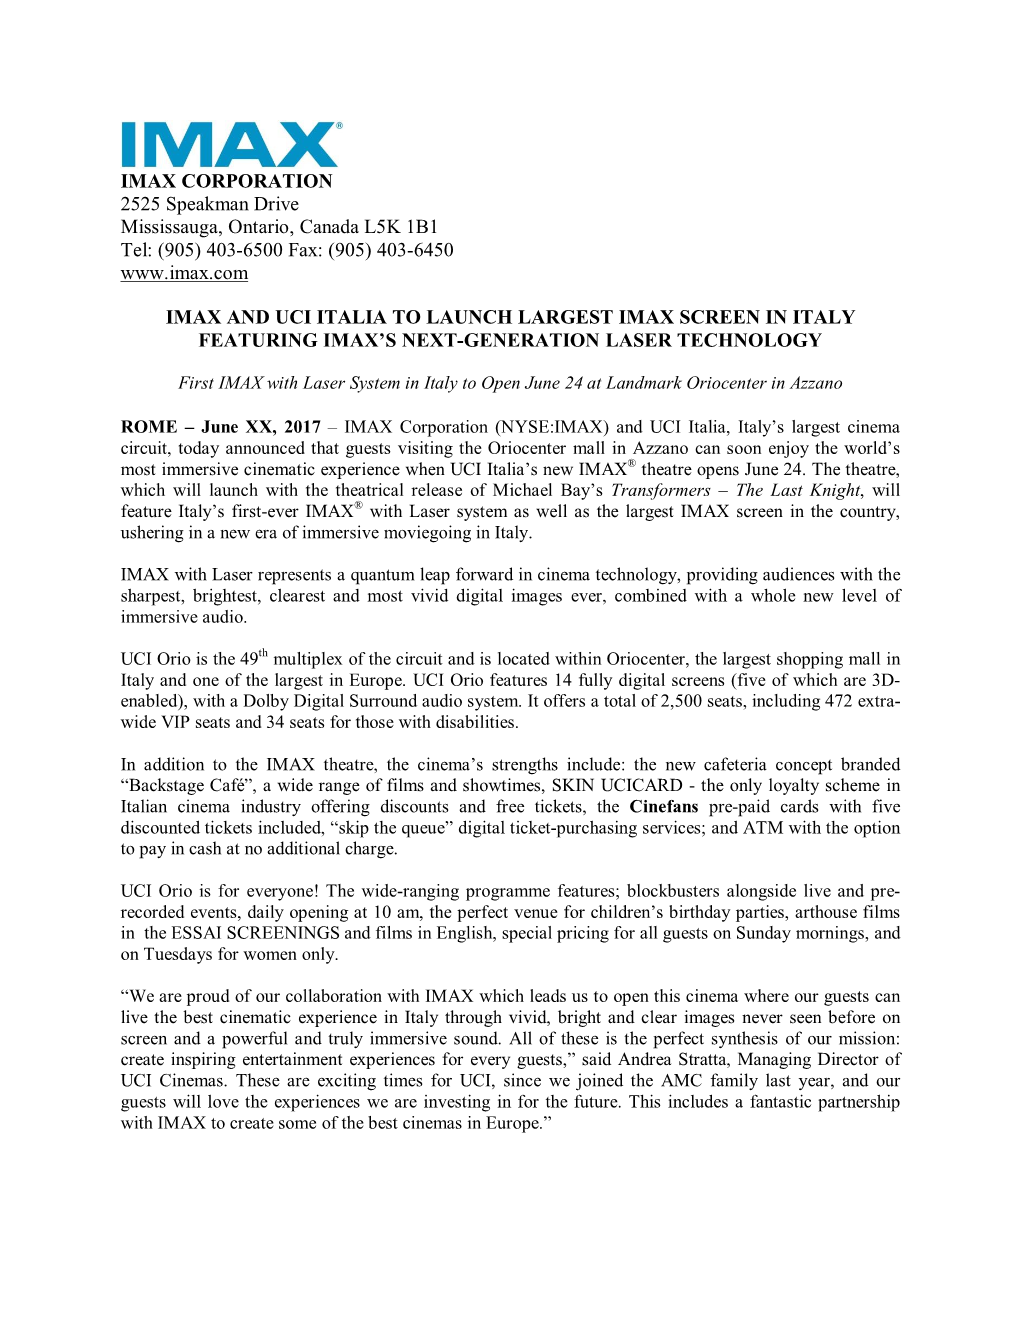 Imax and Uci Italia to Launch Largest Imax Screen in Italy Featuring Imax’S Next-Generation Laser Technology